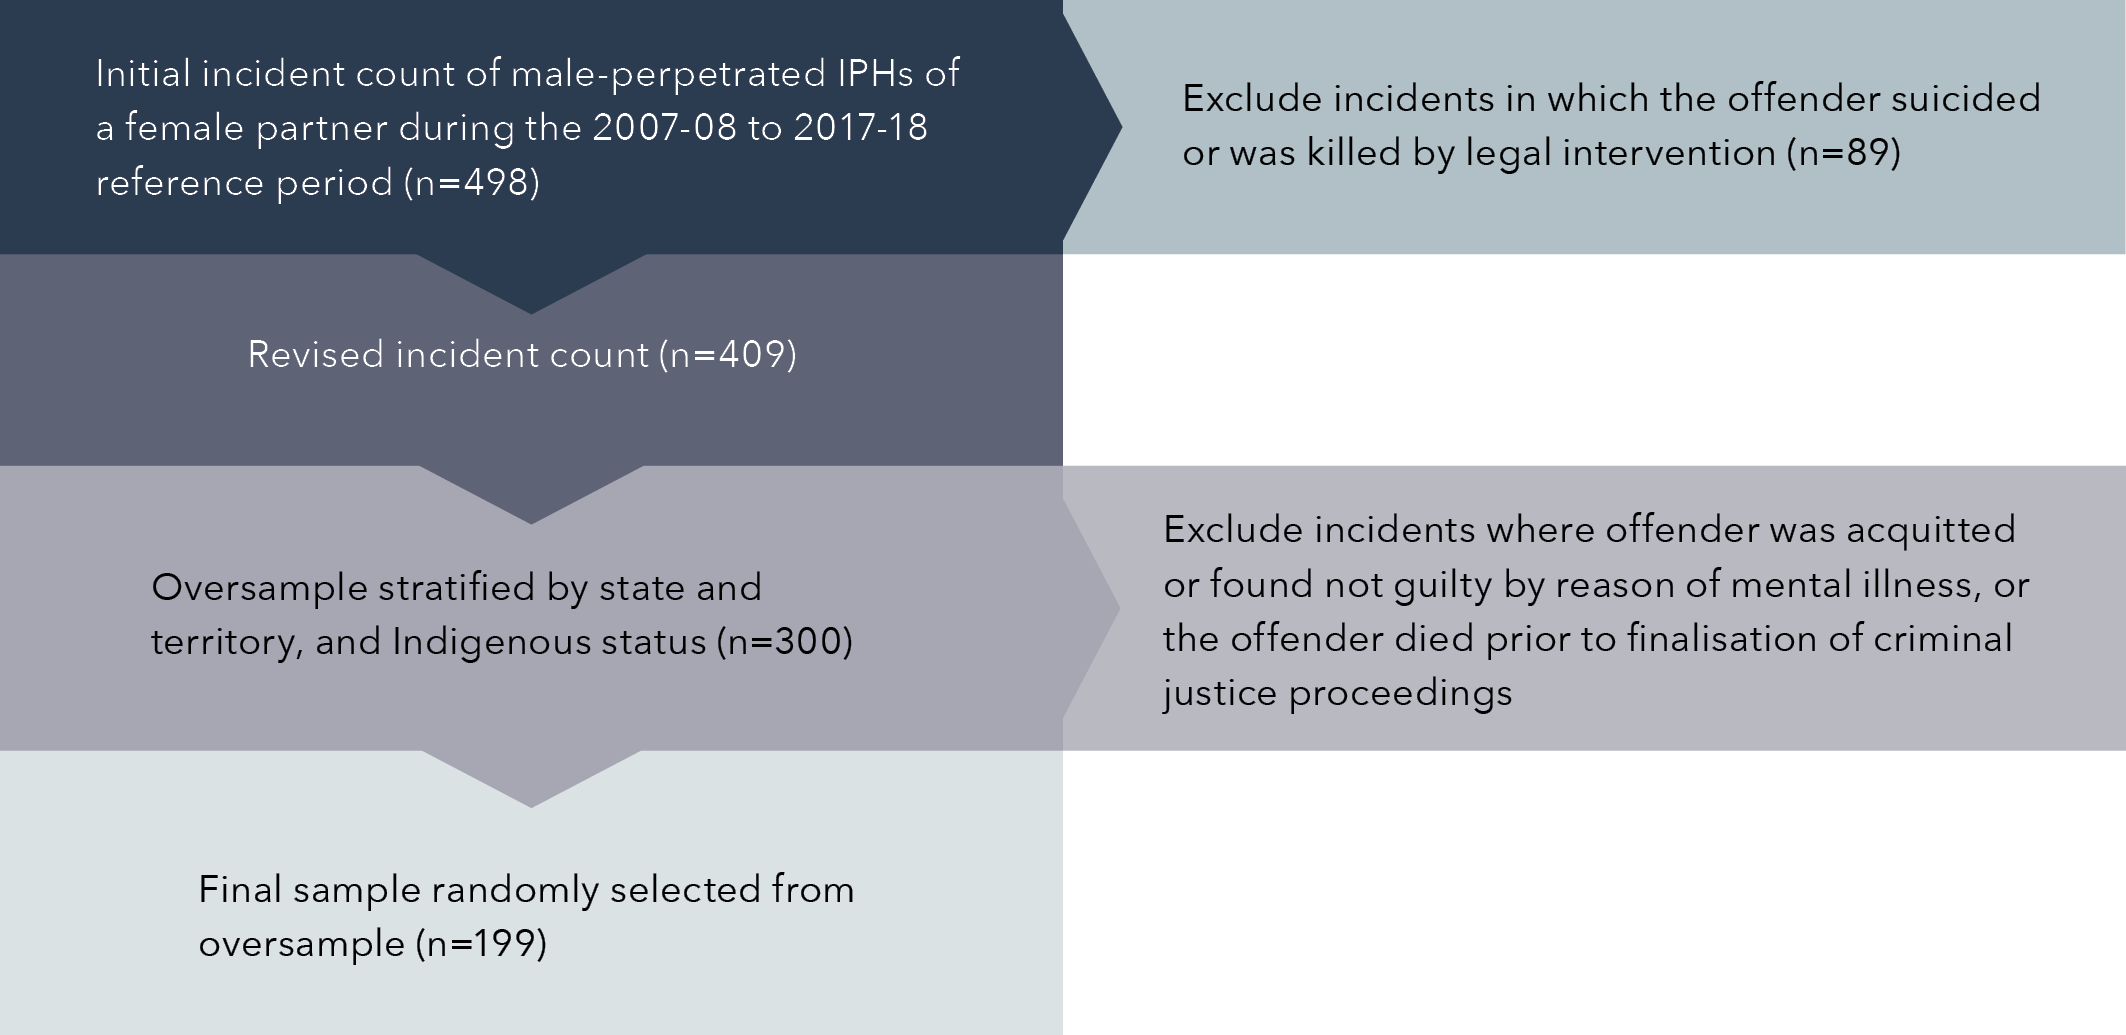 Initial incident count of male-perpetrated IPHs of a female partner during the 2007-08 to 2017-18 reference period (n=498). Exclude incidents in which the offender suicided or was killed by legal intervention (n=89) Revised incident count (n=409) Oversample stratified by state and territory, and Indigenous status (n=300). Exclude incidents where offender was acquitted or found not guilty by reason of mental illness, or the offender died prior to finalisation of criminal justice proceedings Final sample randomly selected from oversample (n=199)